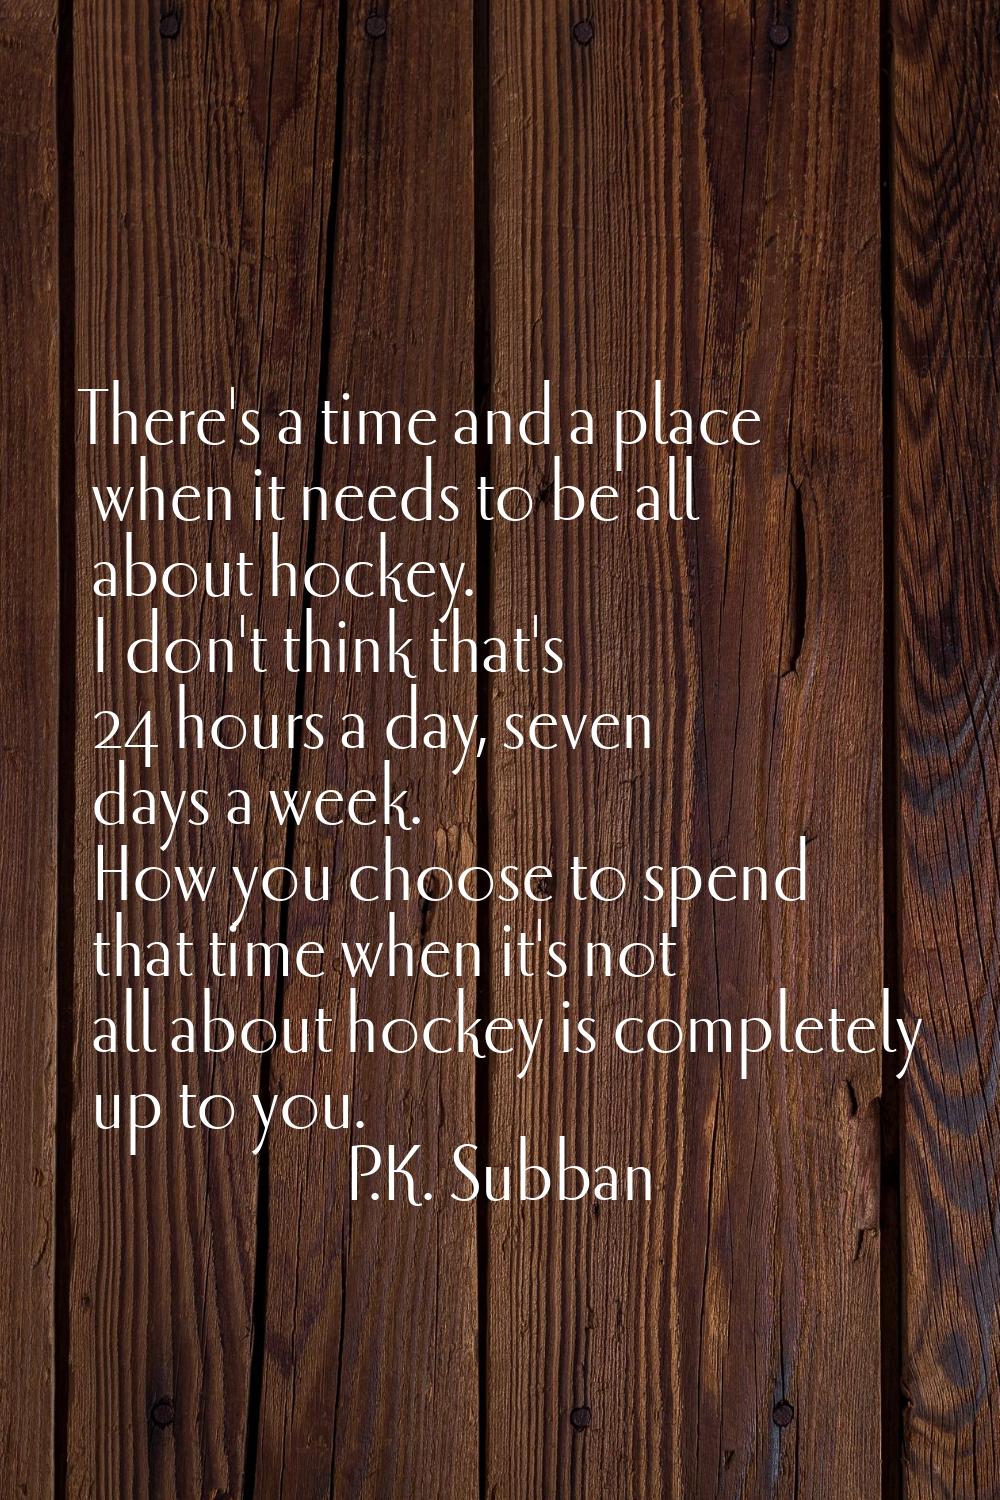 There's a time and a place when it needs to be all about hockey. I don't think that's 24 hours a da